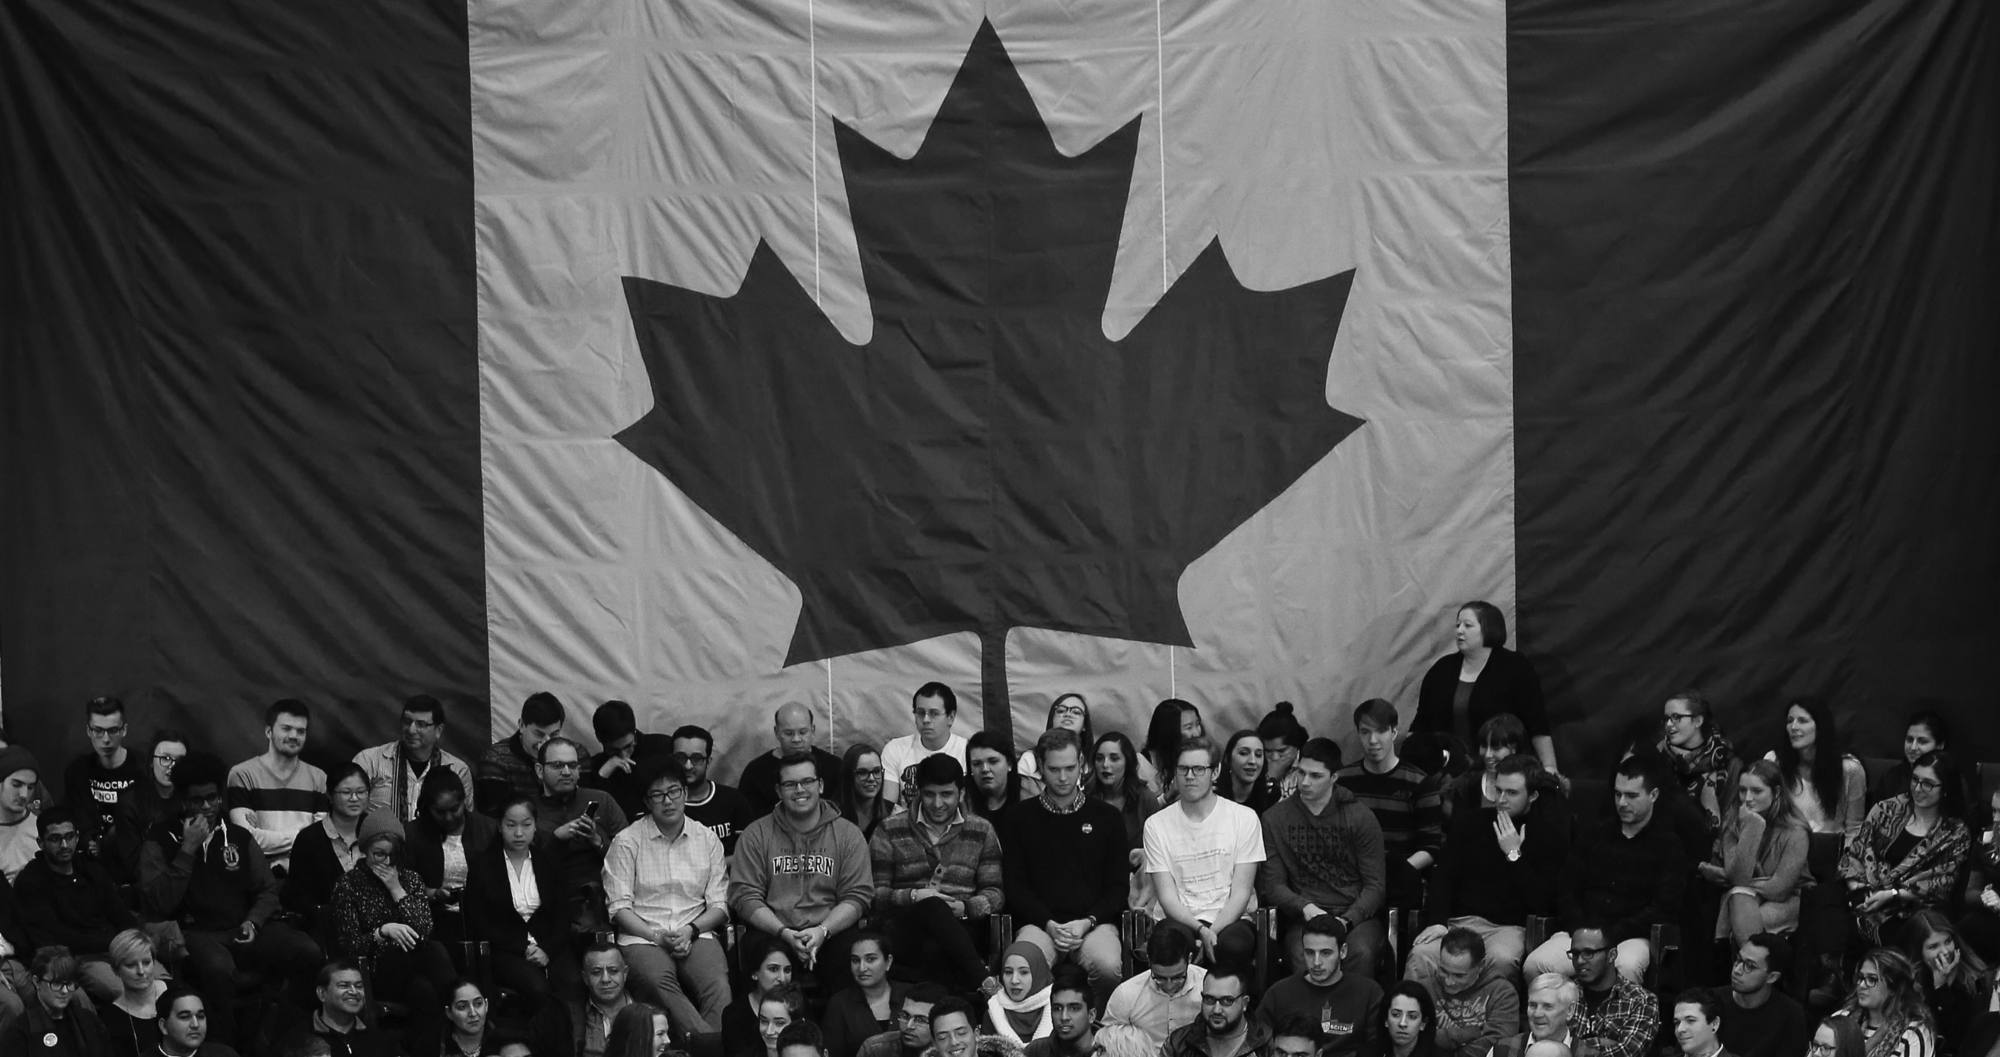 A large group of people sitting in front of a Canadian flag